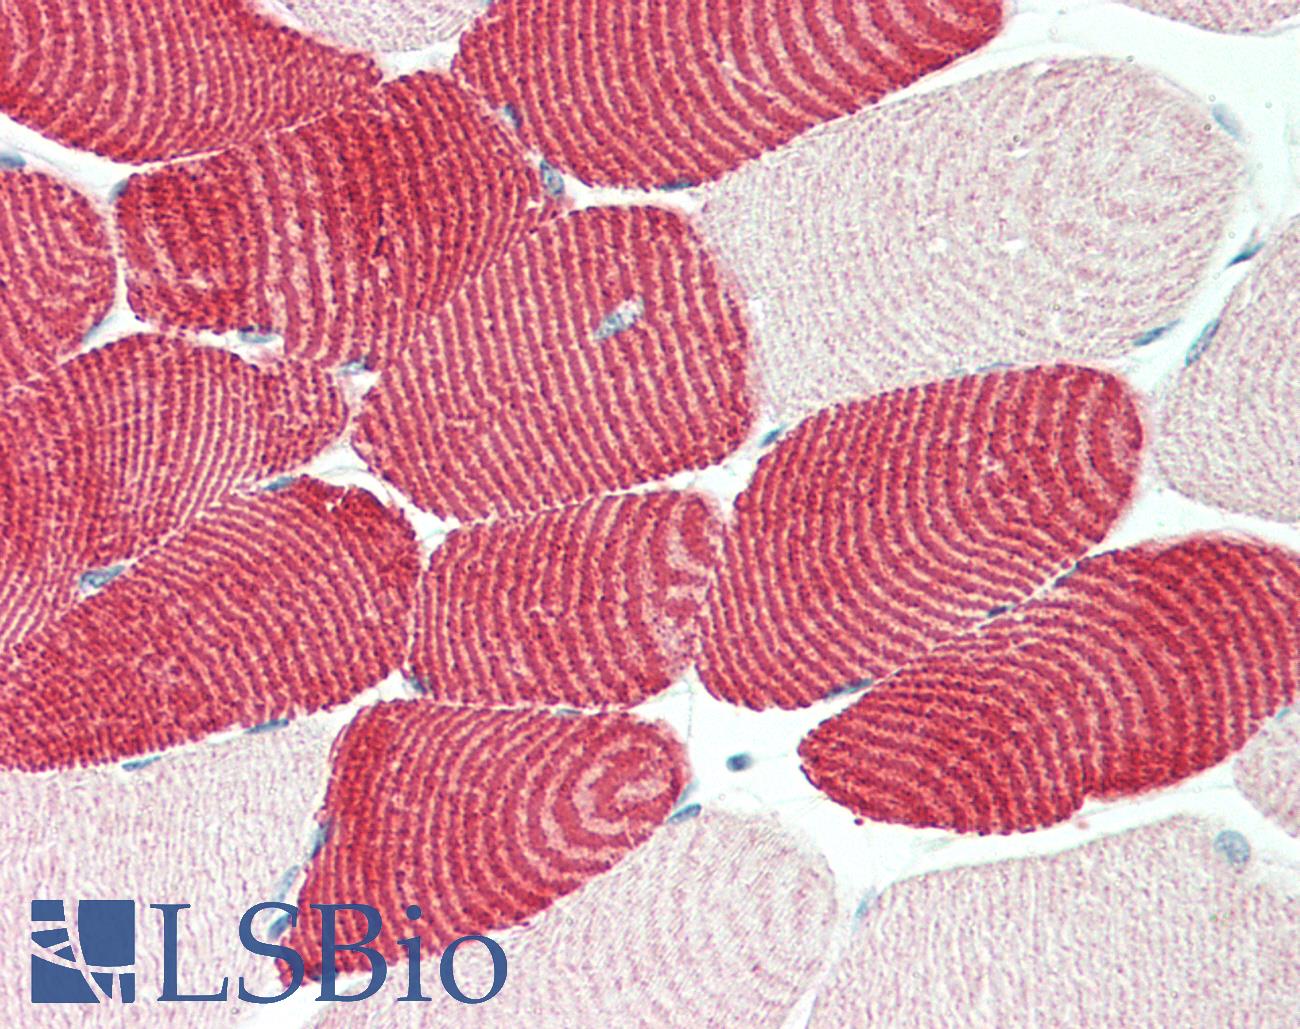 MYH7 Antibody - Skeletal muscle, human: Formalin-Fixed, Paraffin-Embedded (FFPE), at a dilution of 1:100. 